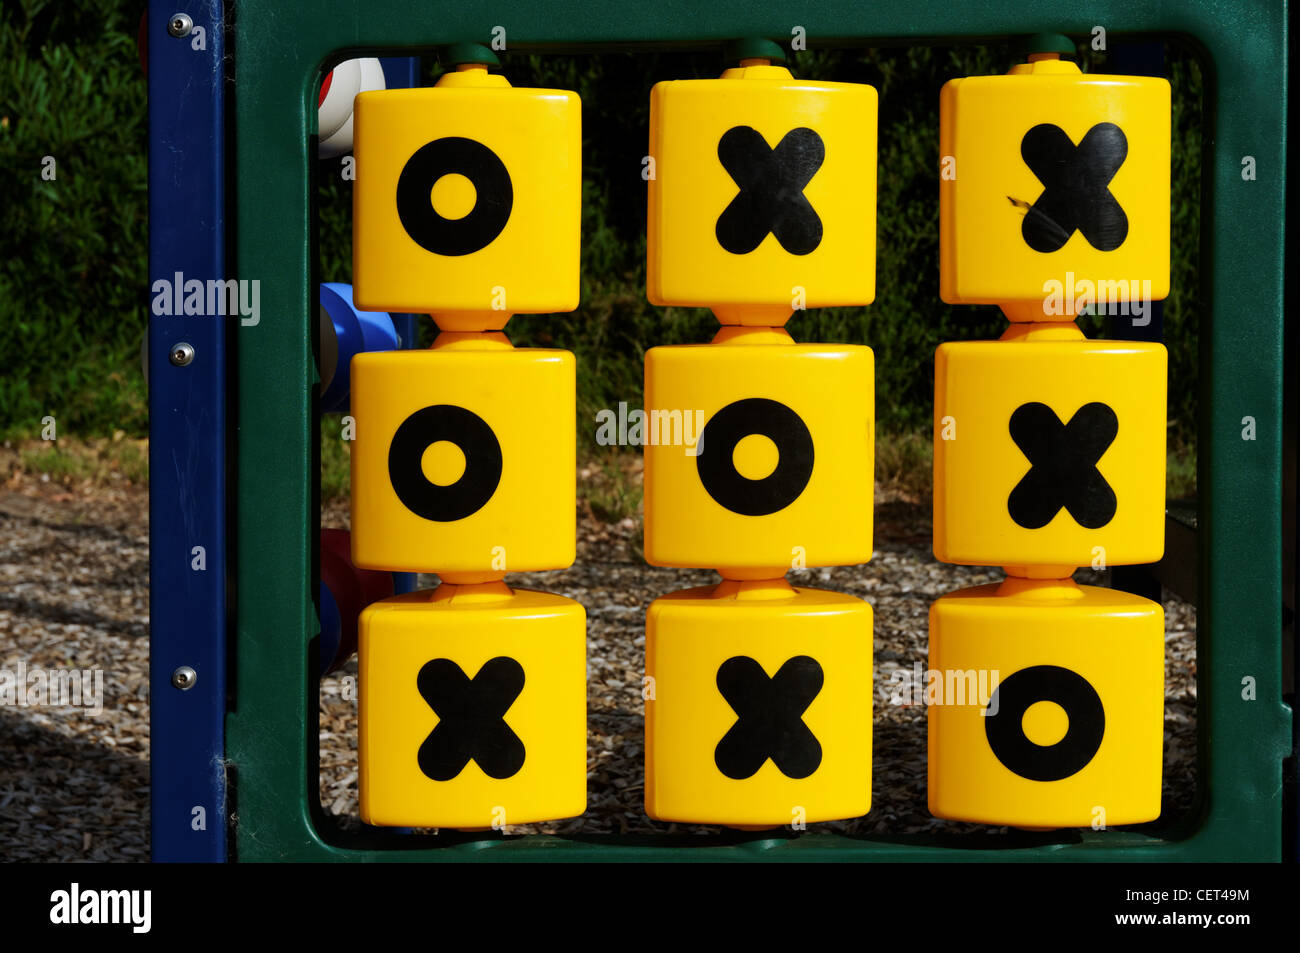 A noughts and crosses (Tic Tac Toe) game for children in a park Stock Photo